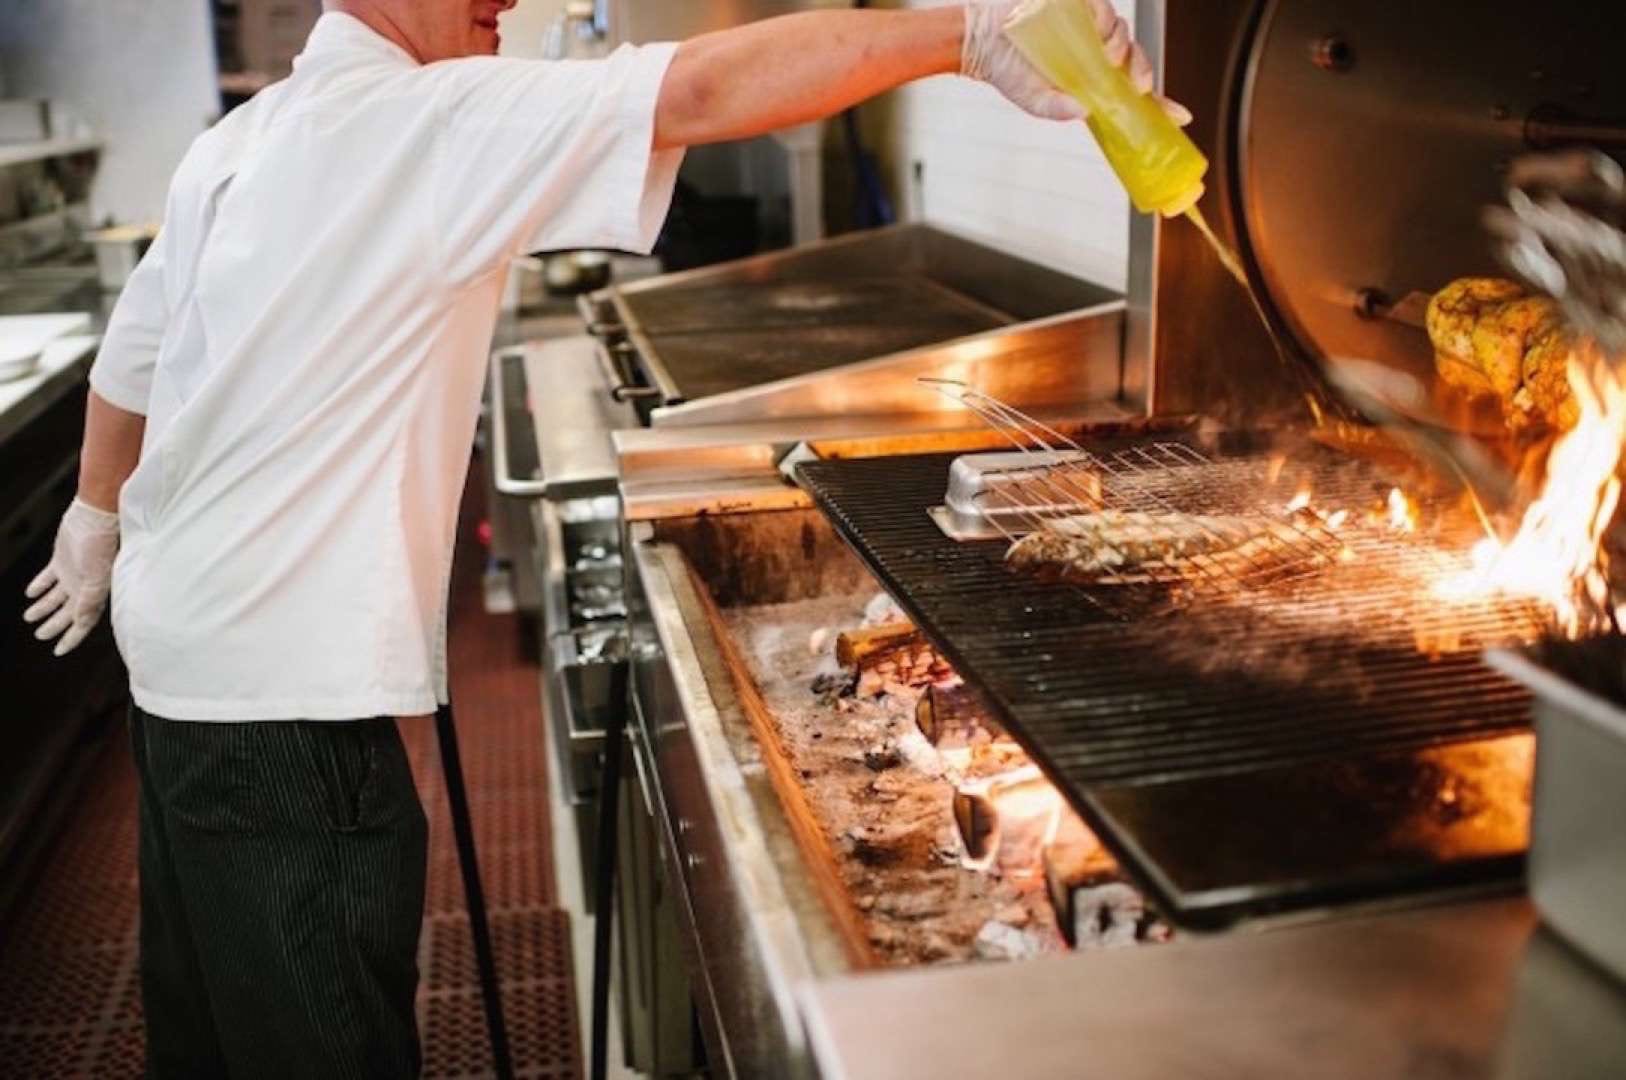 Gulf Stream Media Best New Restaurants Chef wearing latex gloves in a white chef coat and black striped pants spraying oil on a flaming grill.